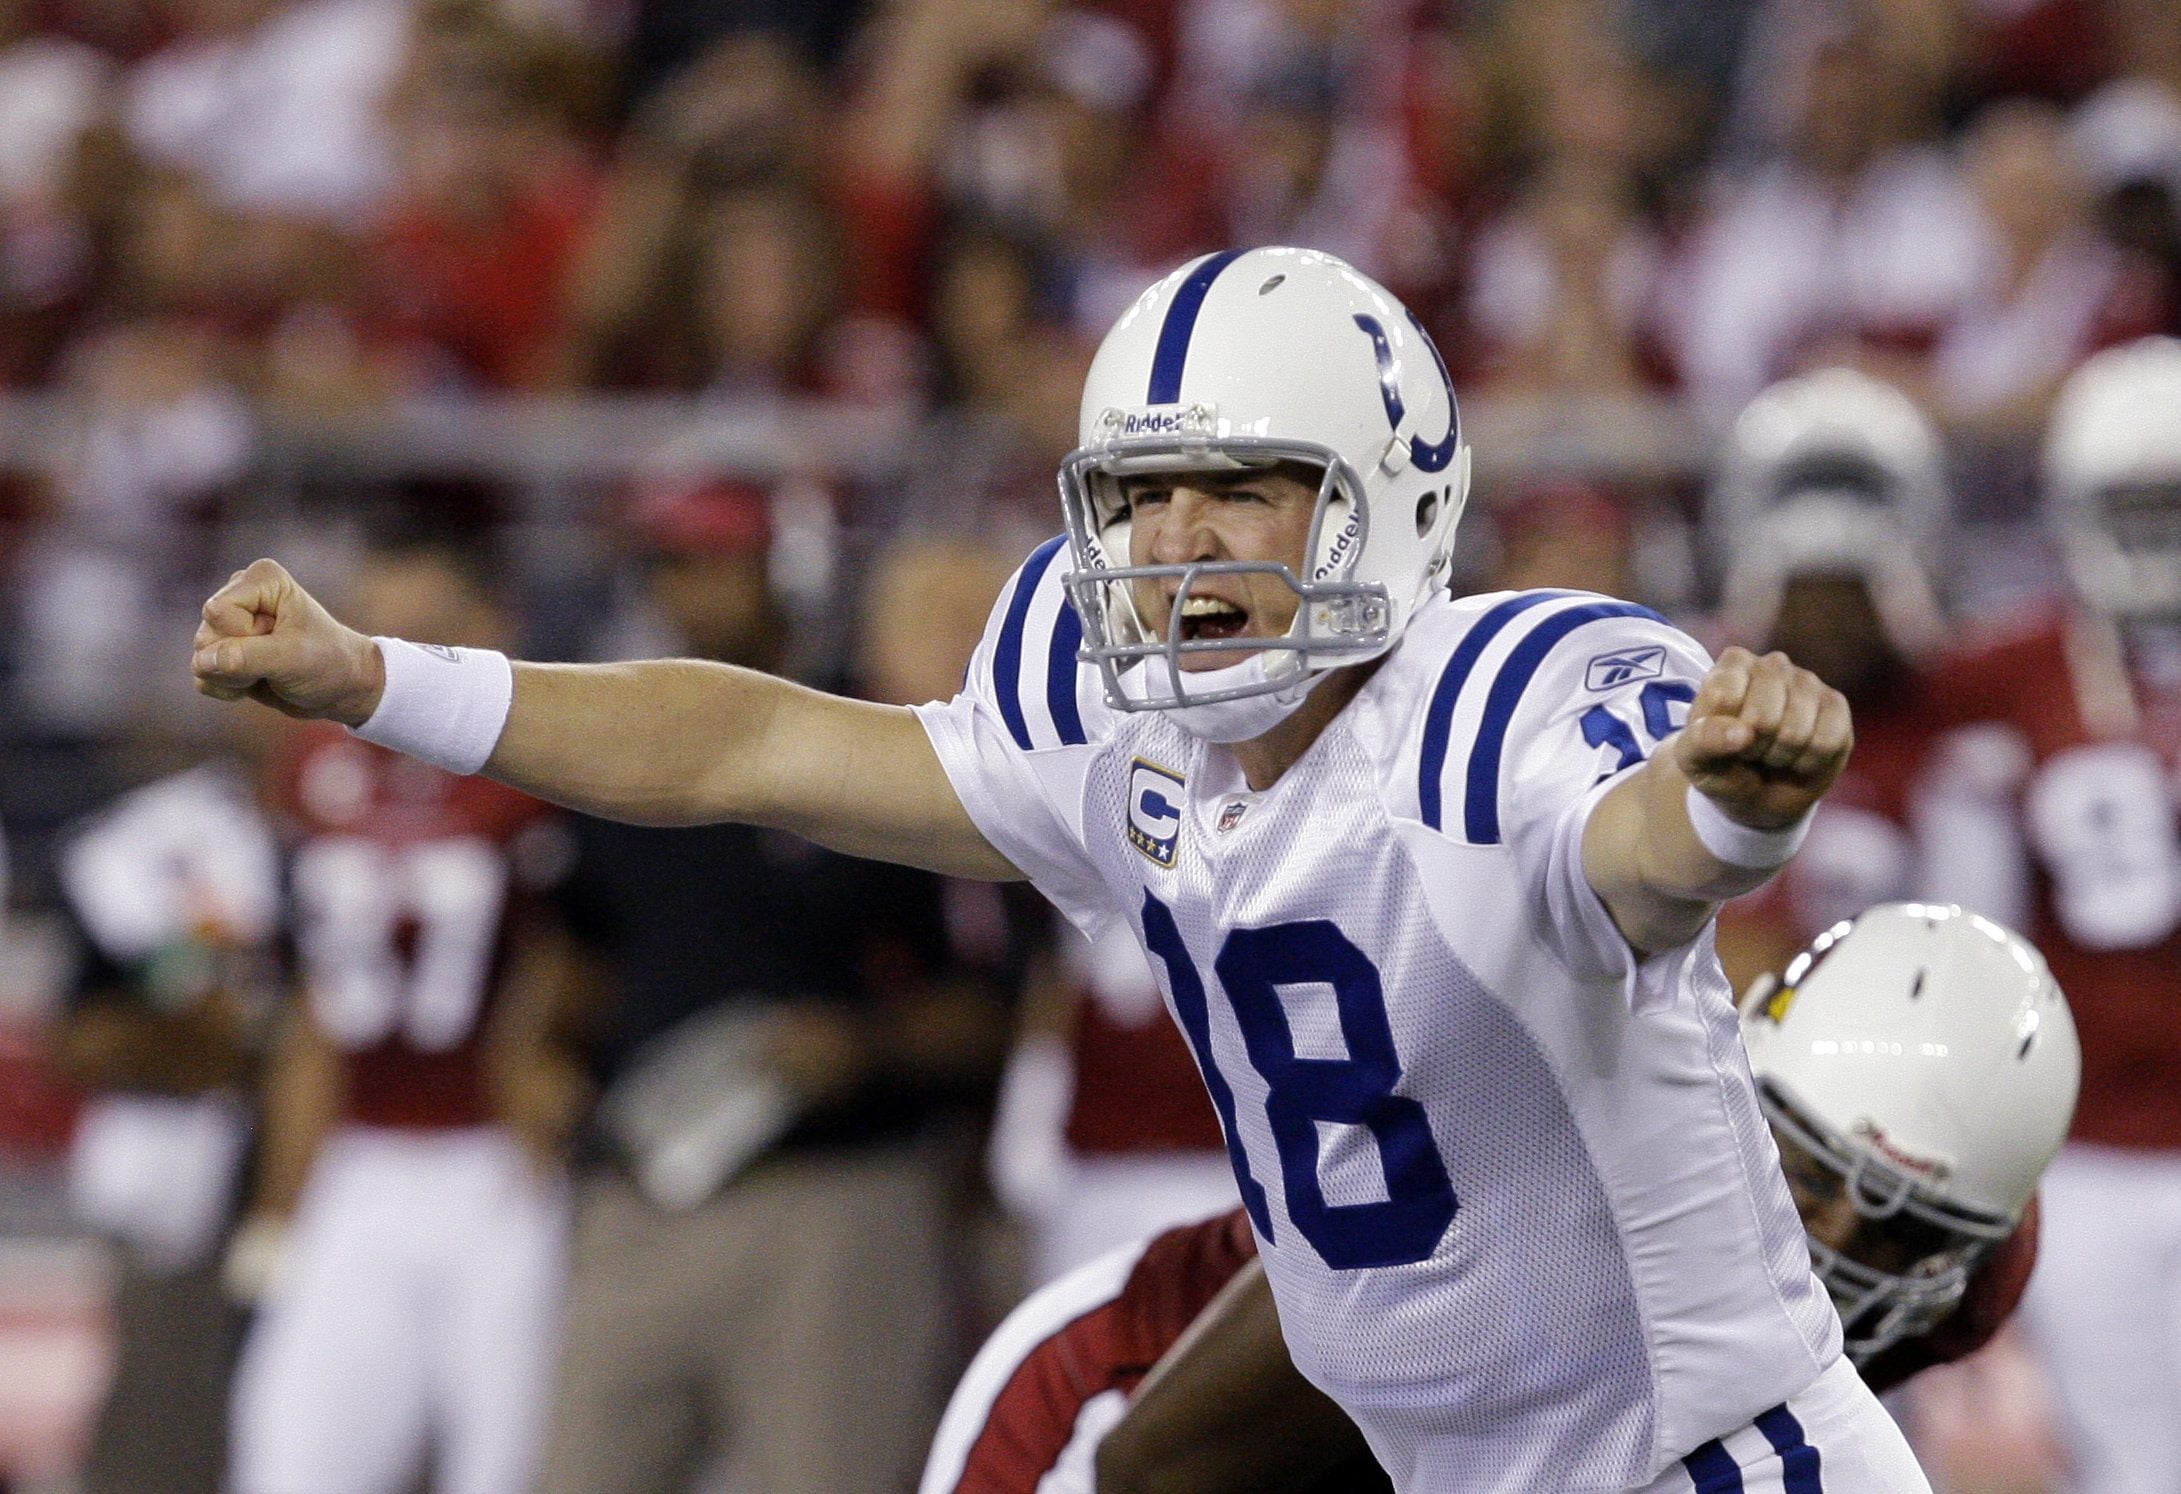 Indianapolis Colts' Peyton Manning shouts signals to teammates as they play the Arizona Cardinals in the second quarter of a football game in Glendale, Ariz. A person with knowledge of the decision tells The Associated Press on Sunday, March 6, 2016, that Manning has informed the Denver Broncos he's going to retire. (AP Photo/Ross D.